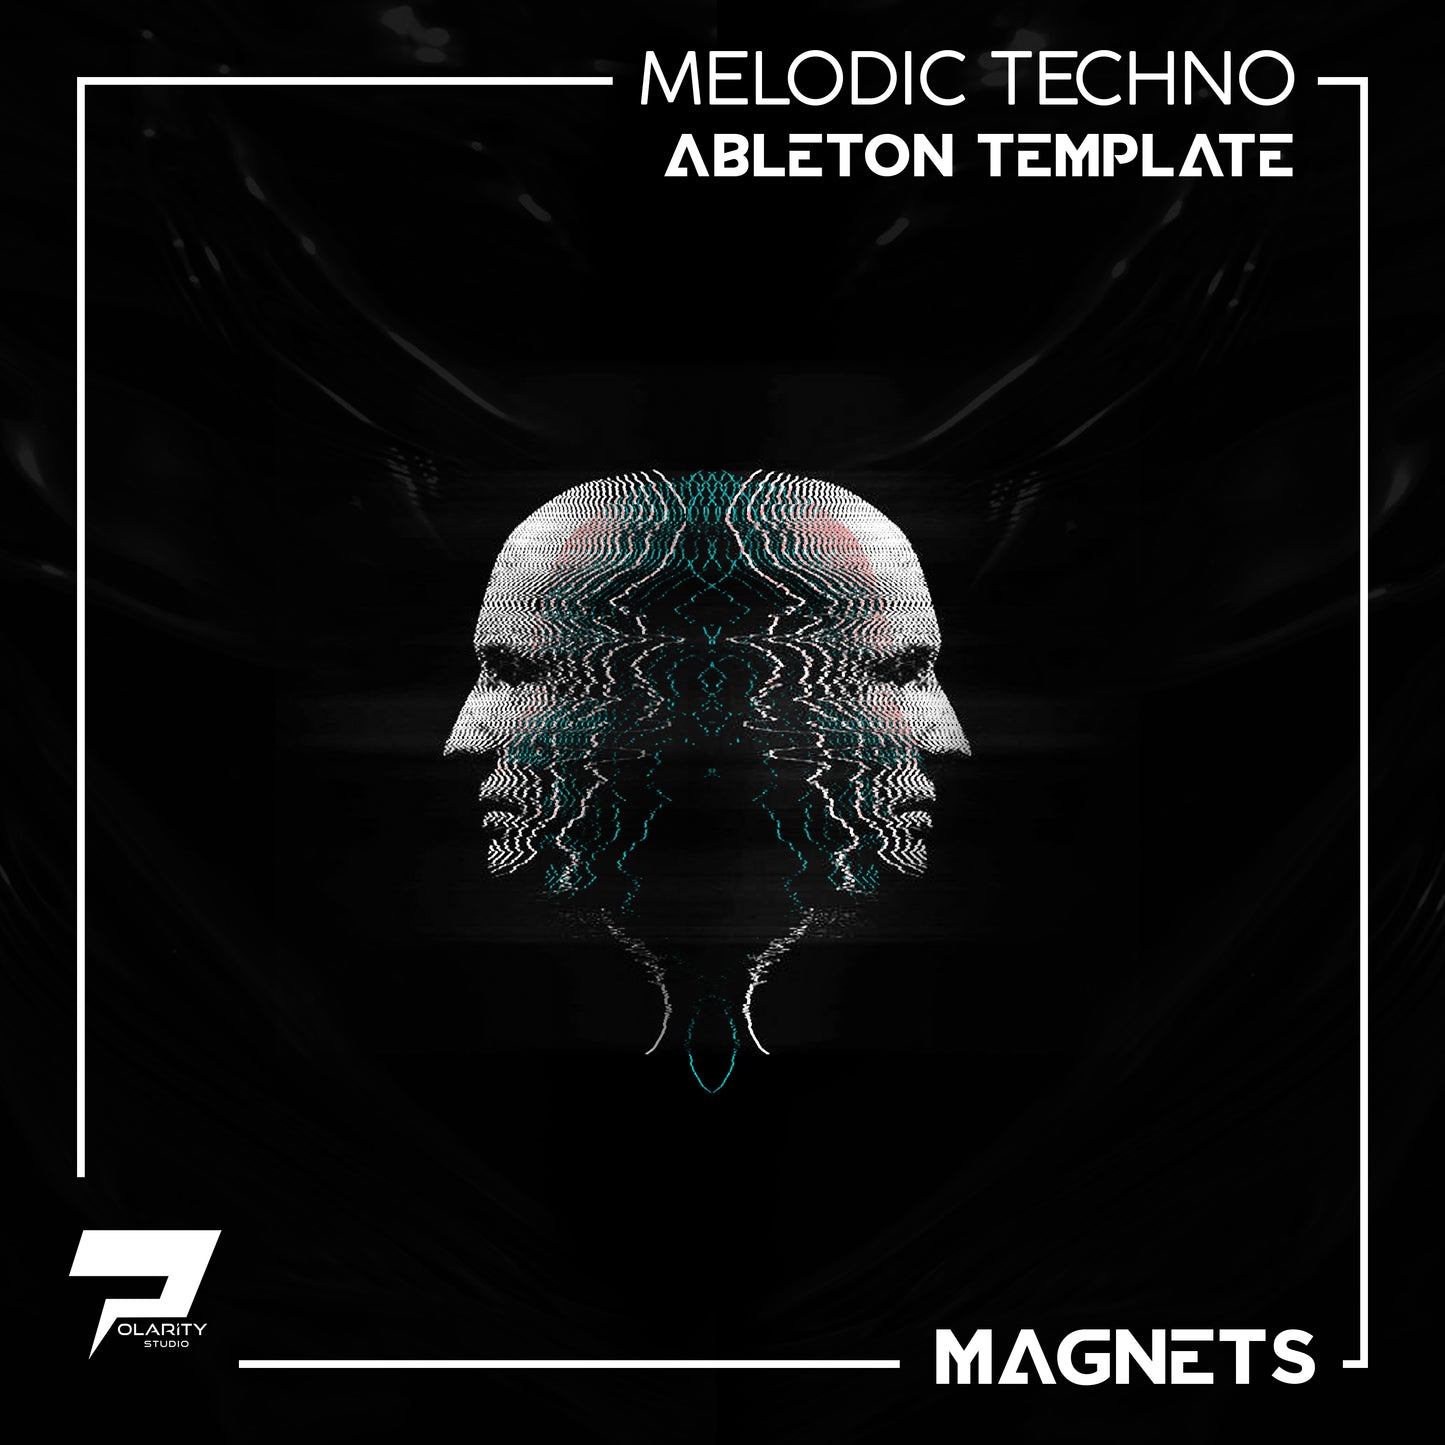 Magnets - Melodic Techno Ableton Template